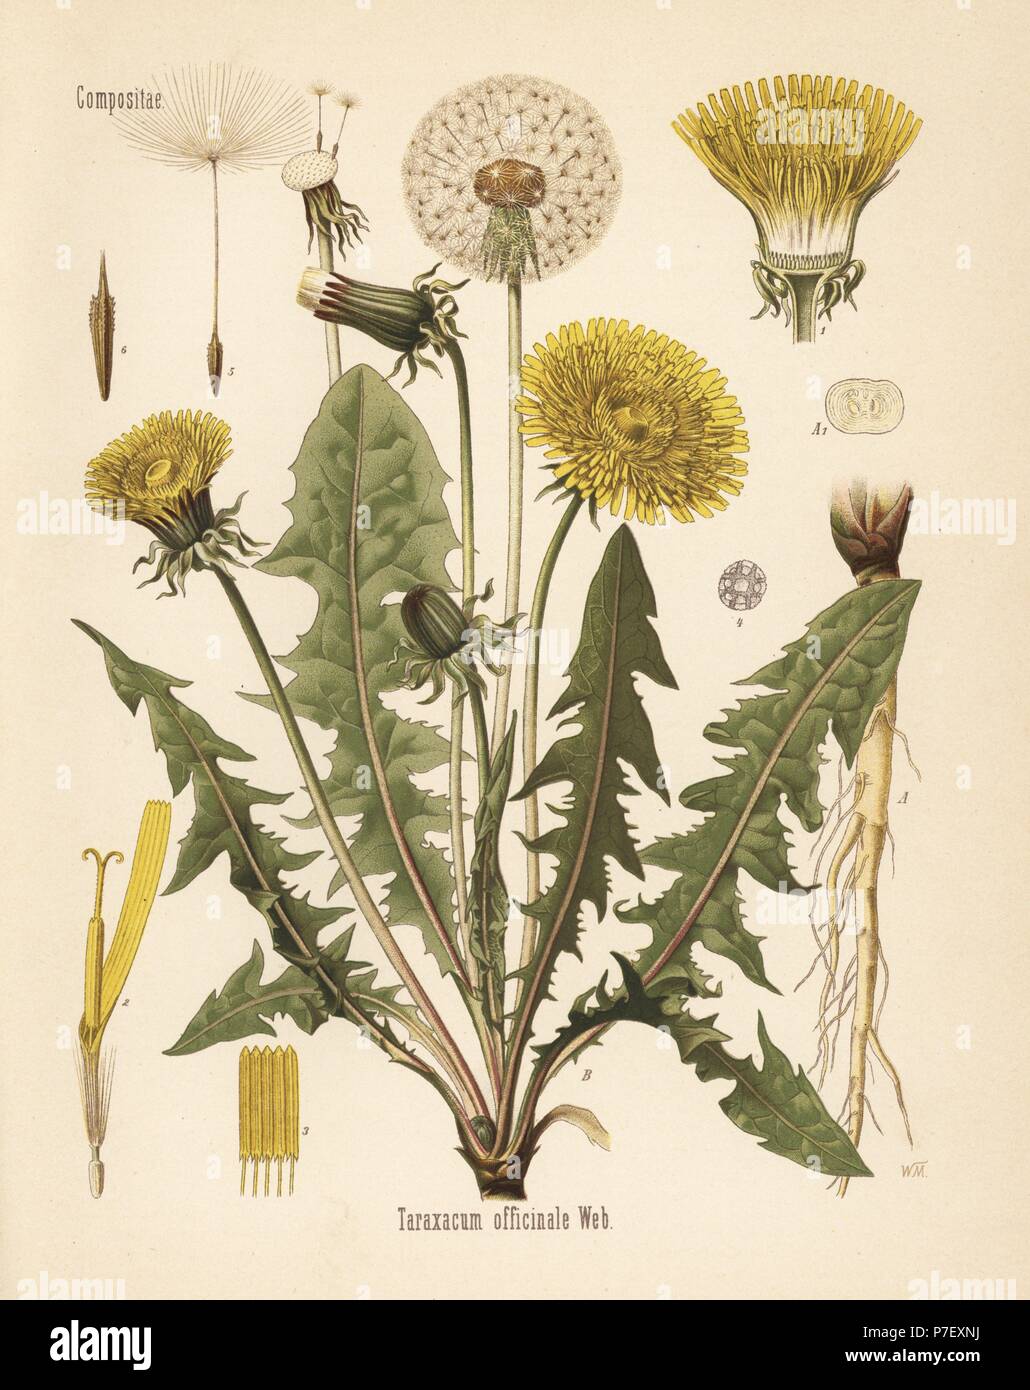 Common dandelion, Taraxacum campylodes (Taraxacum officinale). Chromolithograph after a botanical illustration by Walther Muller from Hermann Adolph Koehler's Medicinal Plants, edited by Gustav Pabst, Koehler, Germany, 1887. Stock Photo